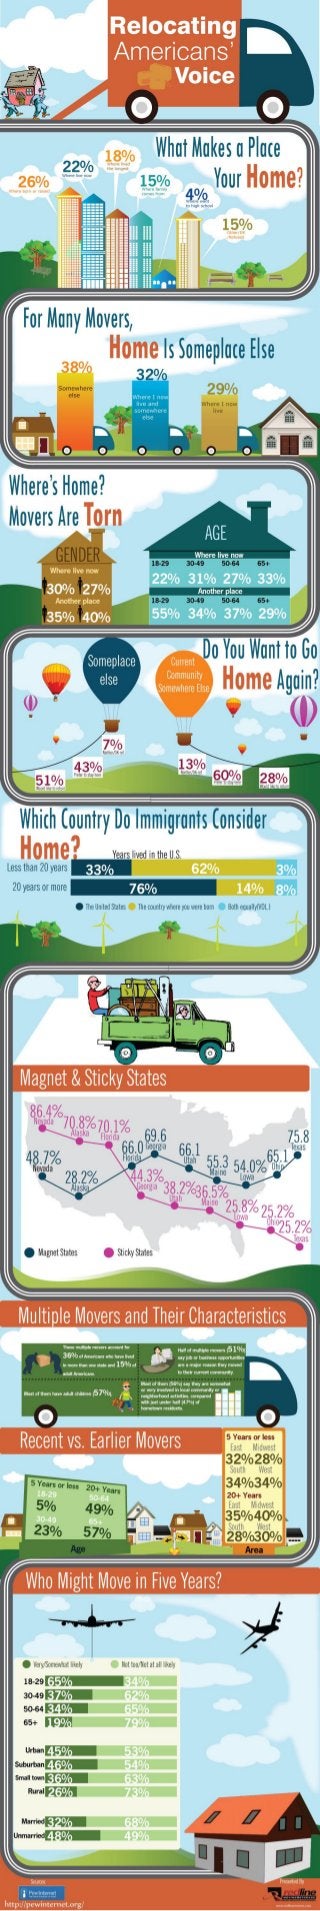 Relocating Americans’ Voice: Moving Facts and Figures [infographic]